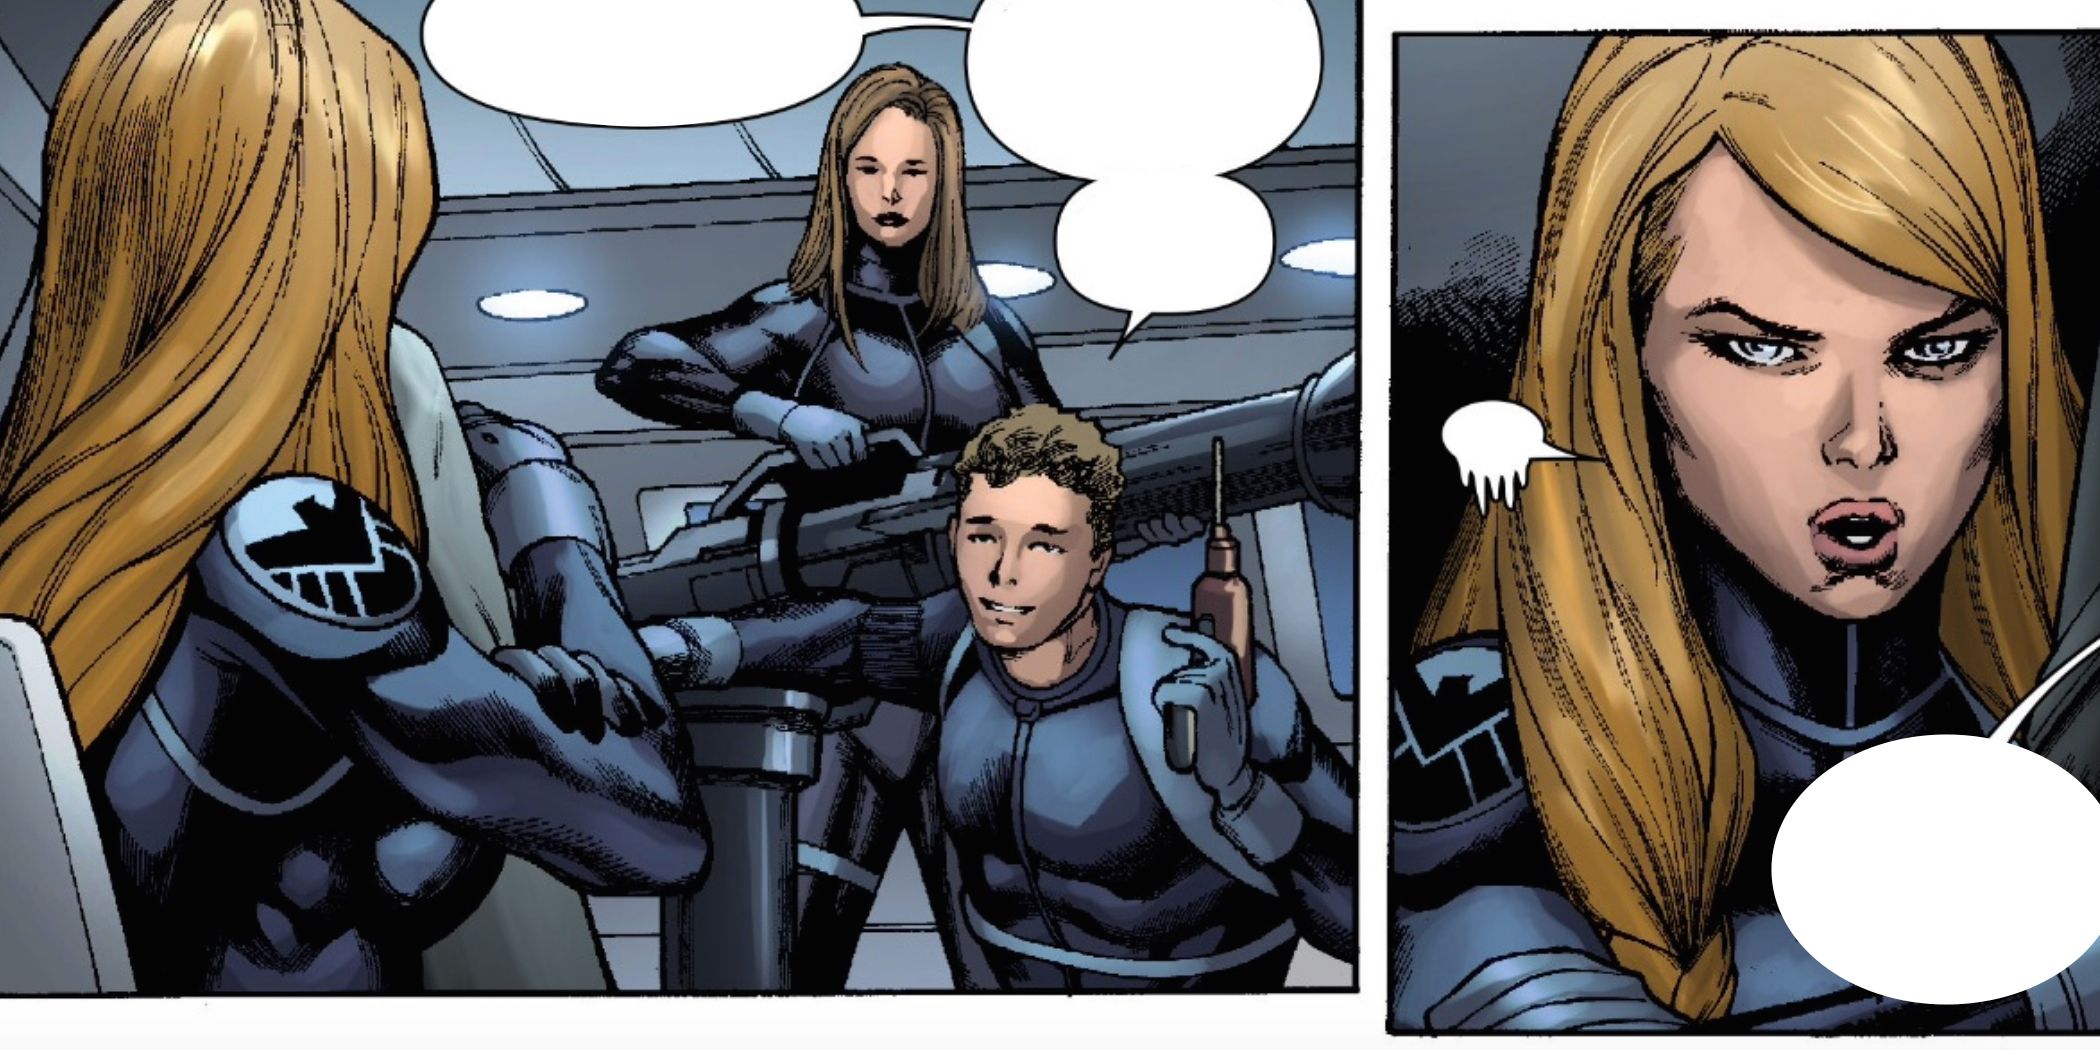 Jemma And Fitz Meet Valkyrie In SHIELD Issue 1